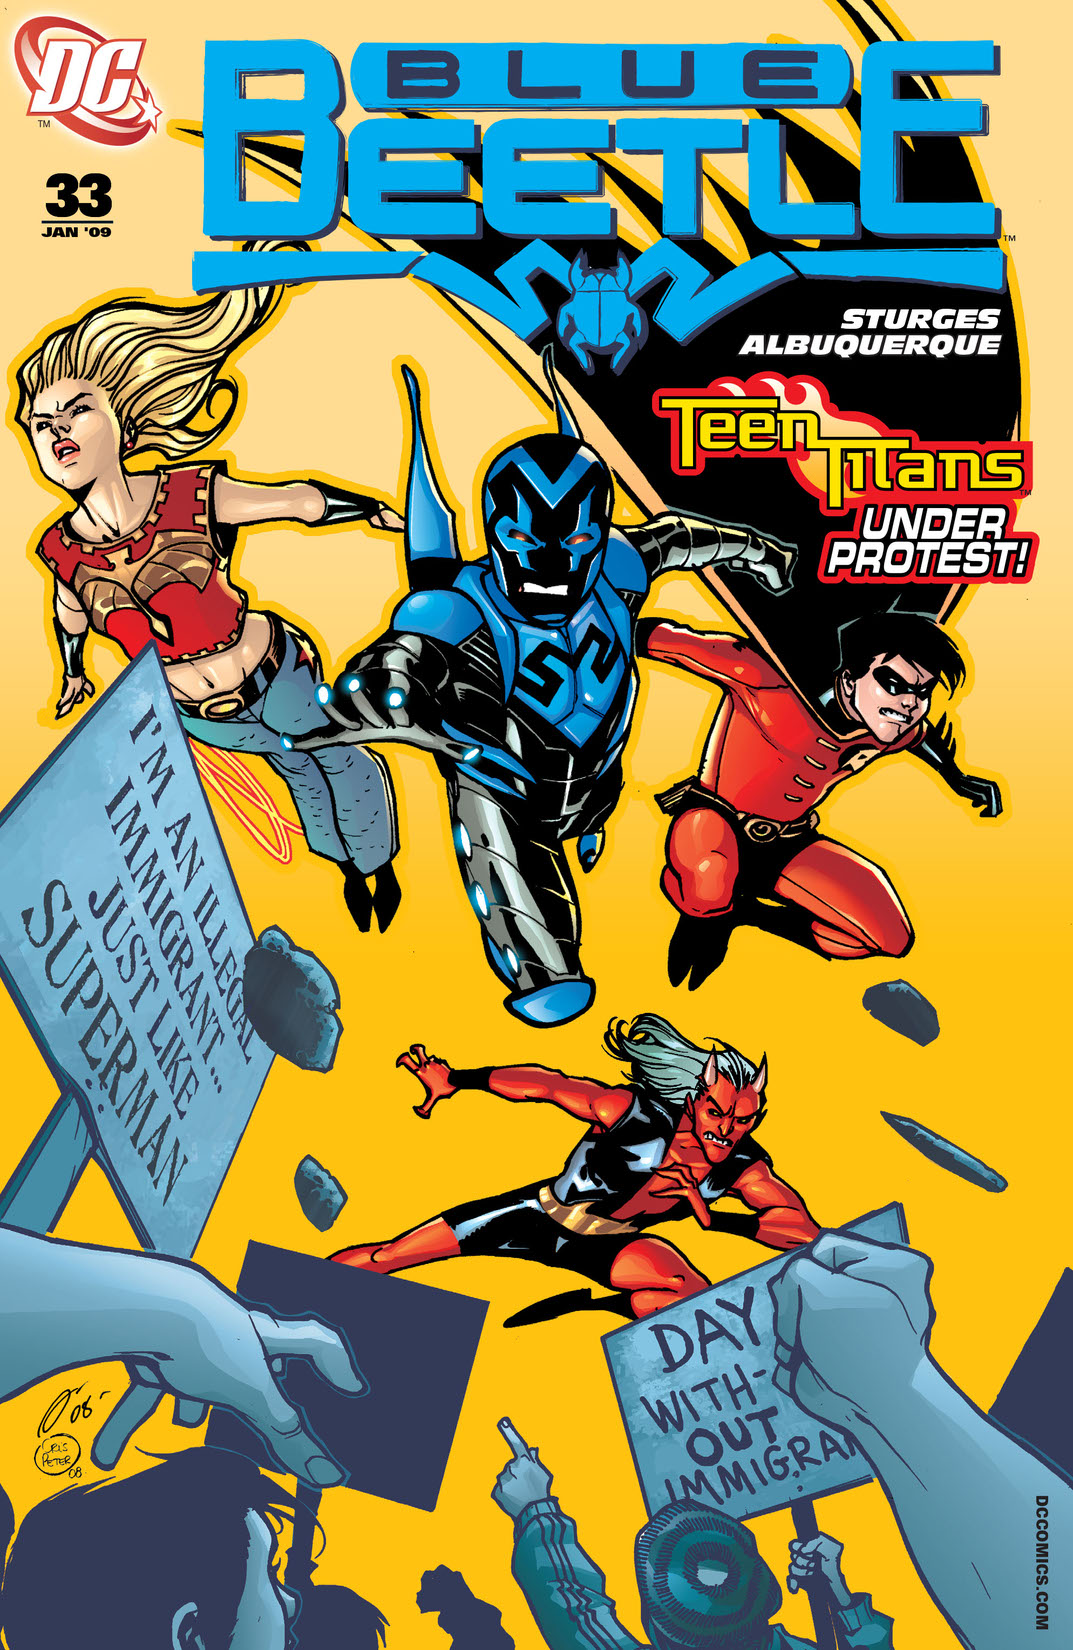 Blue Beetle (2006-) #33 preview images